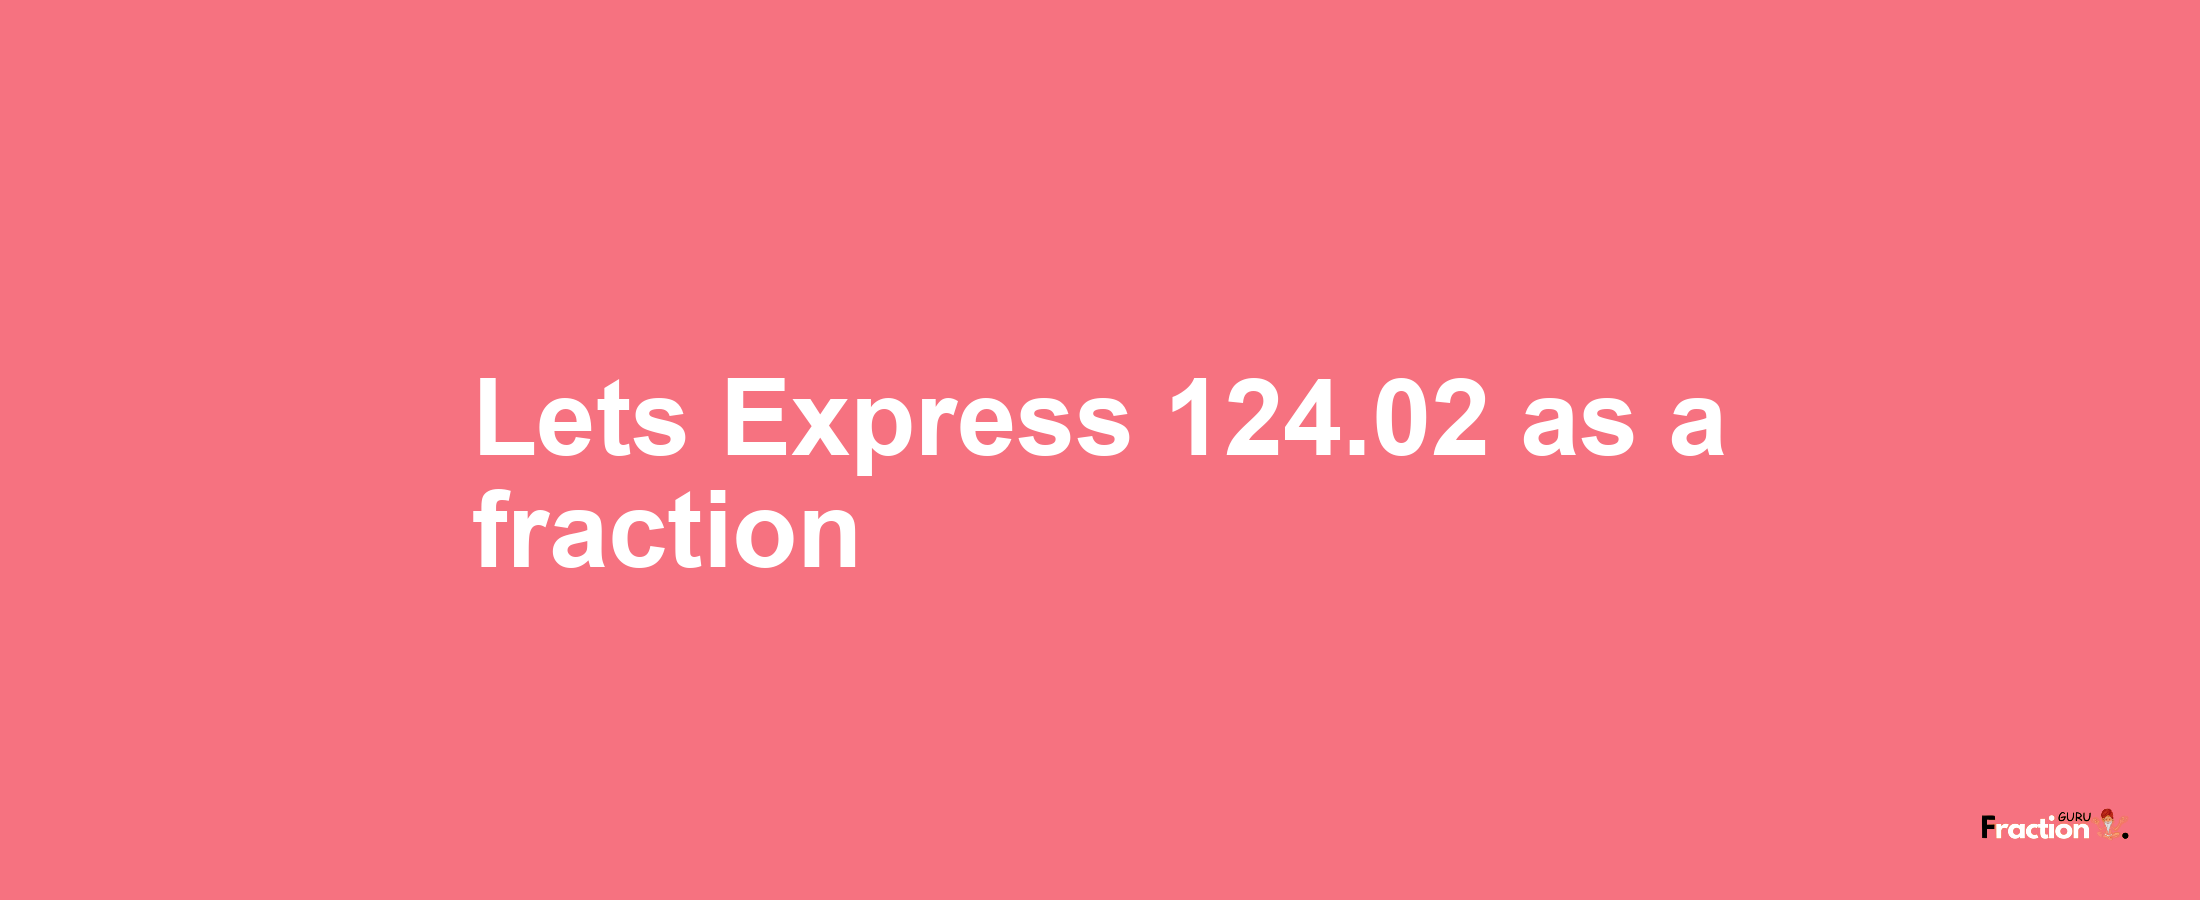 Lets Express 124.02 as afraction